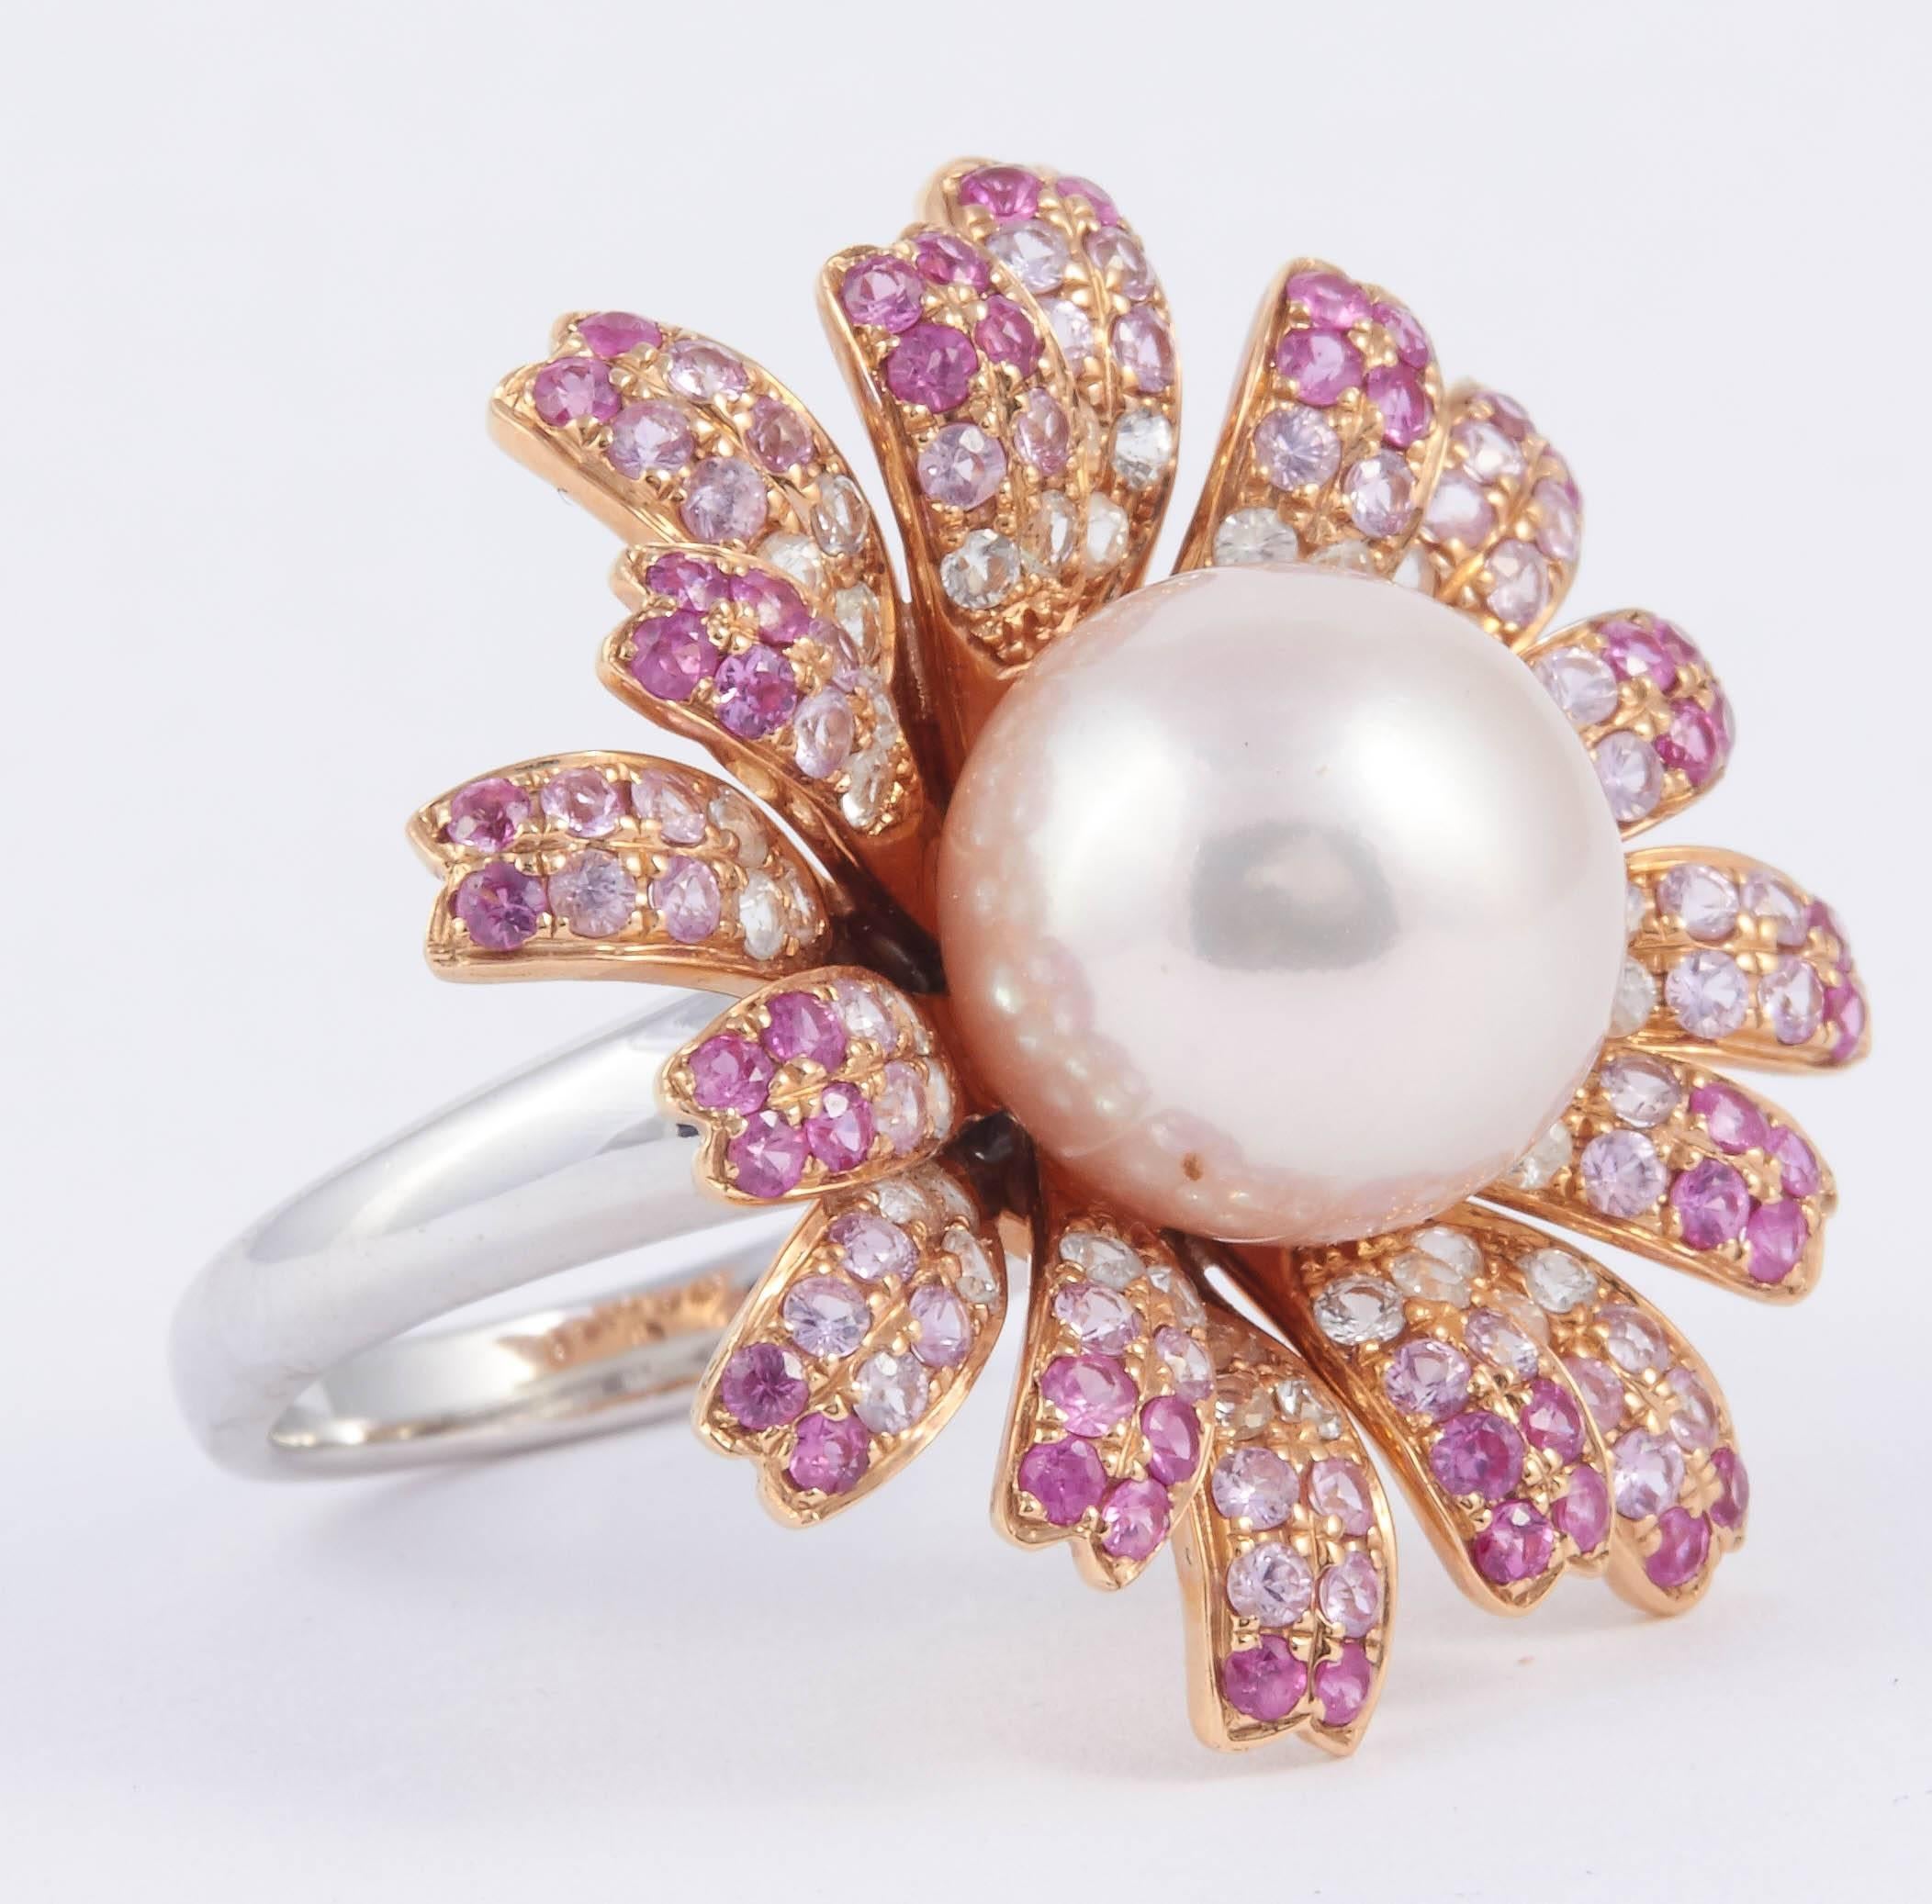 White Fresh Water Pearl :11 mm
18K Gold
2.12 Pink Sapphire